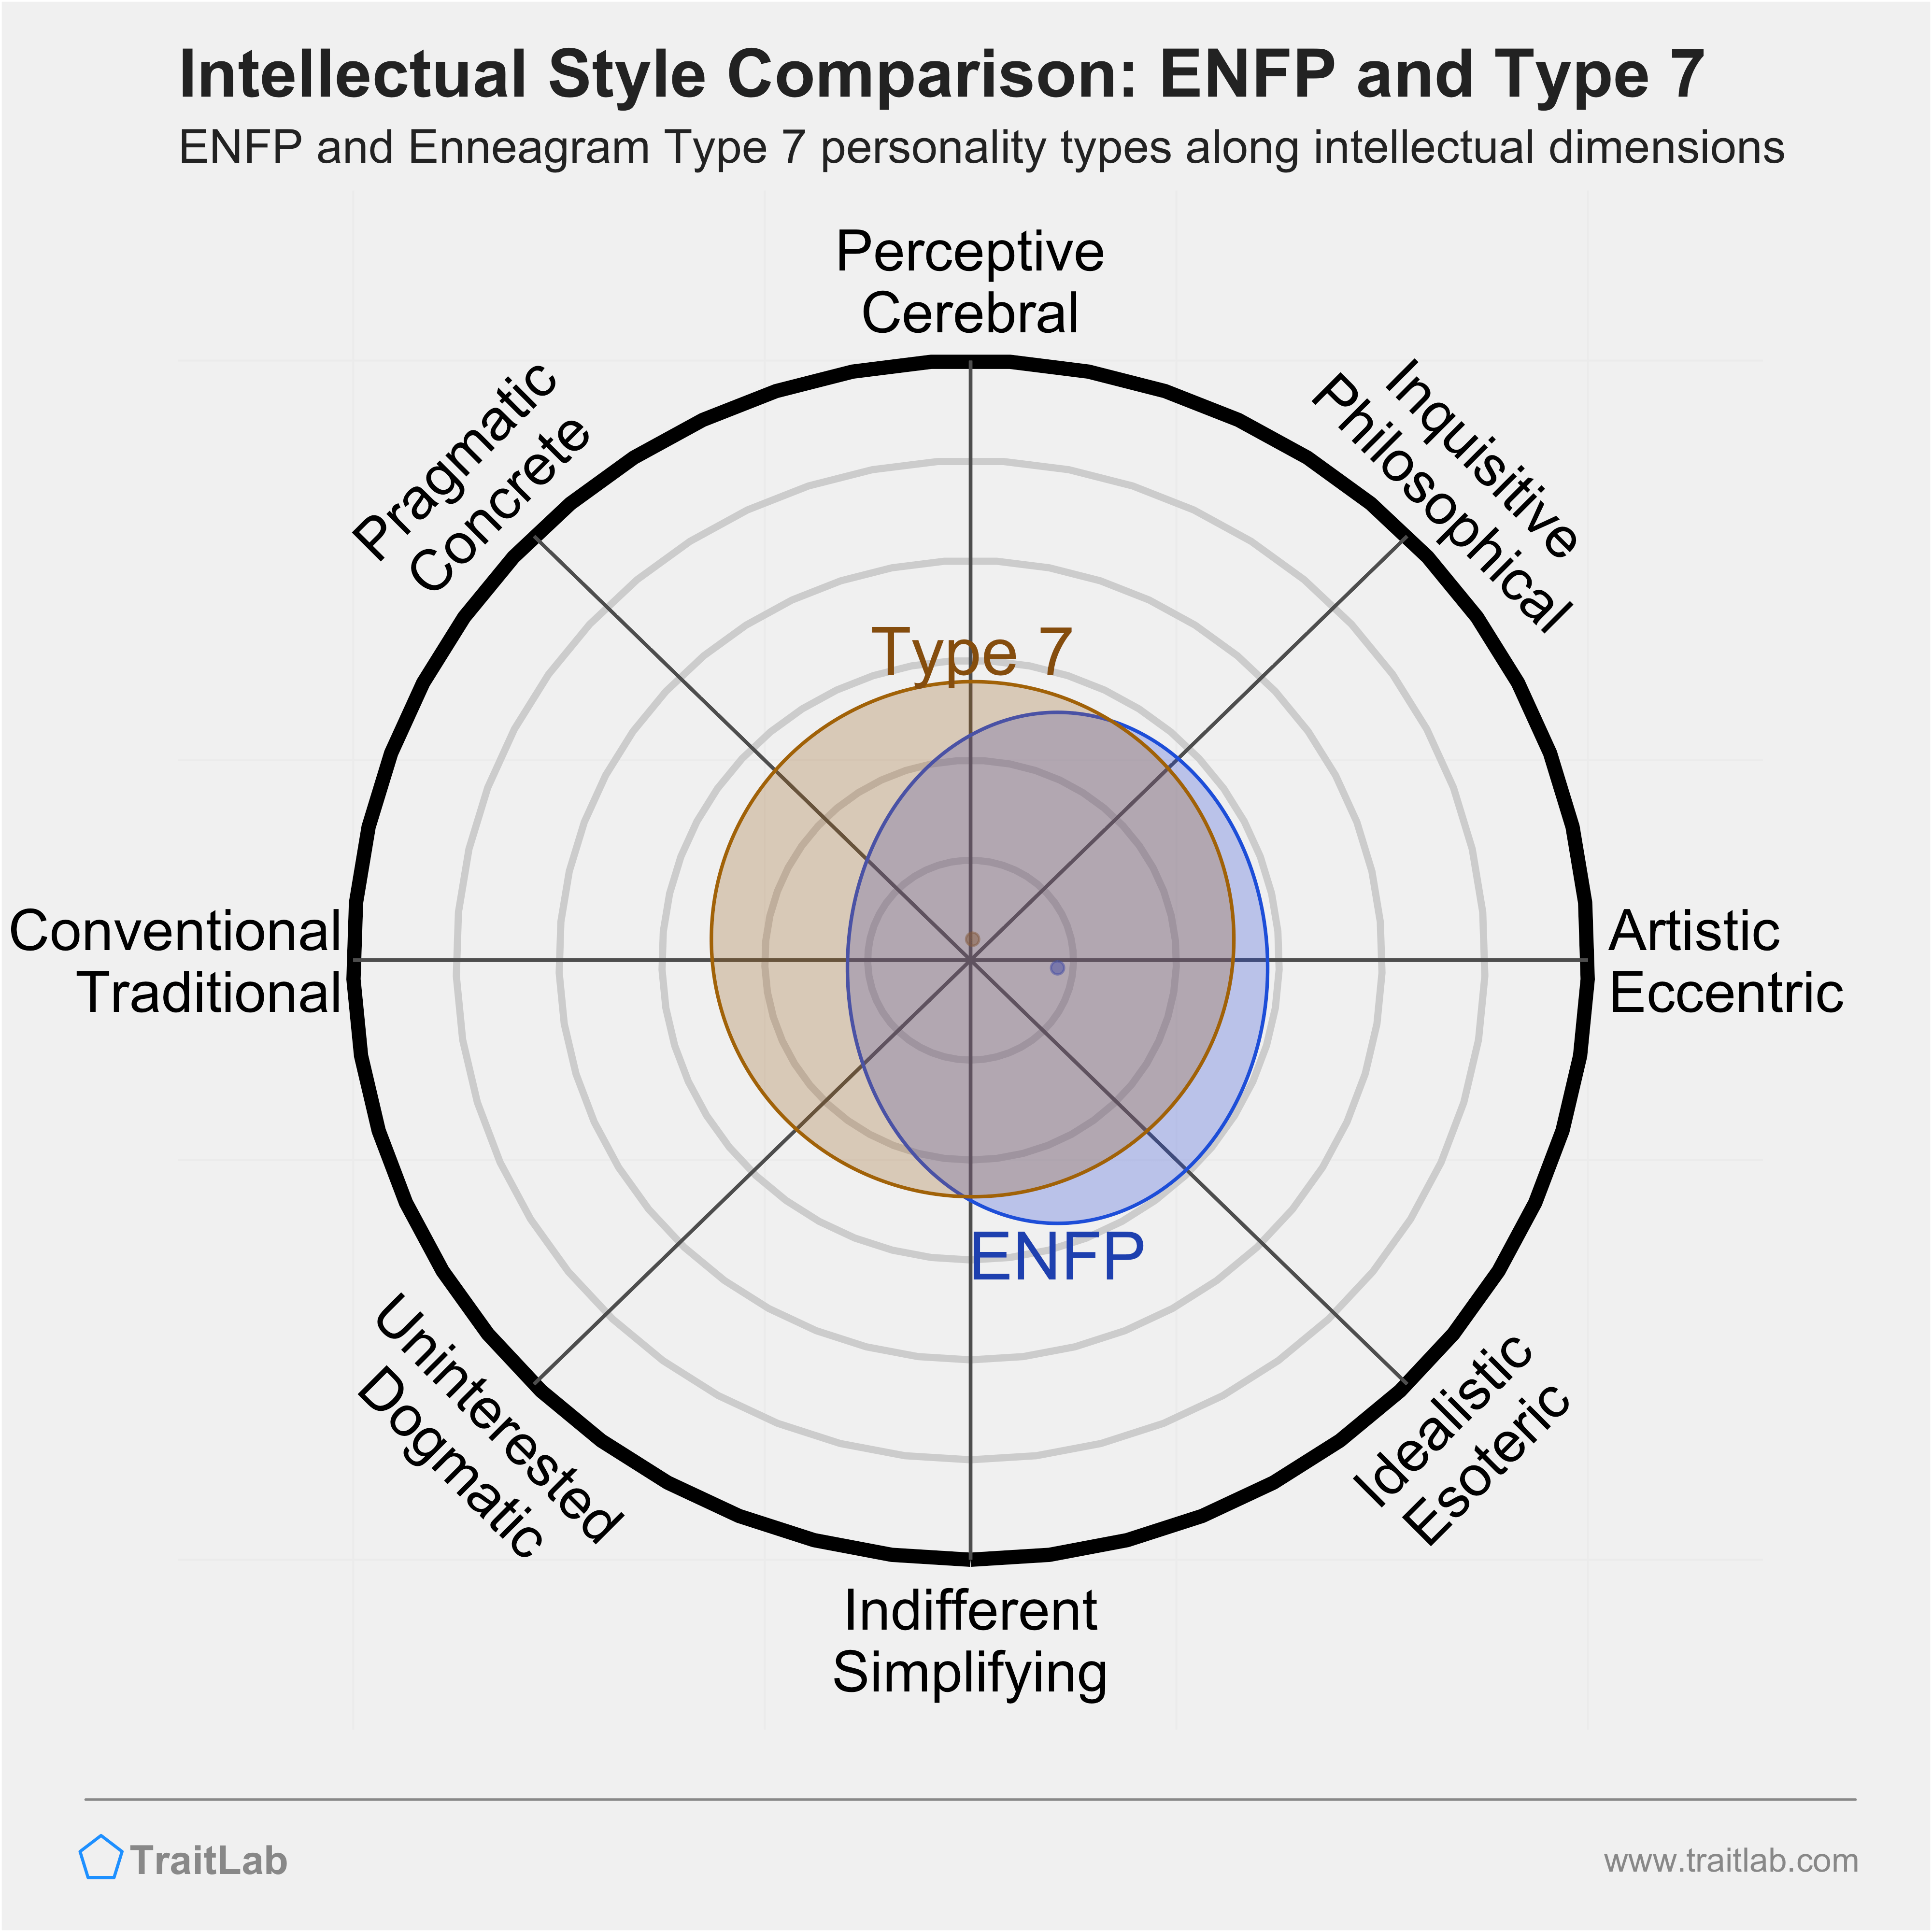 ENFP and Type 7 comparison across intellectual dimensions